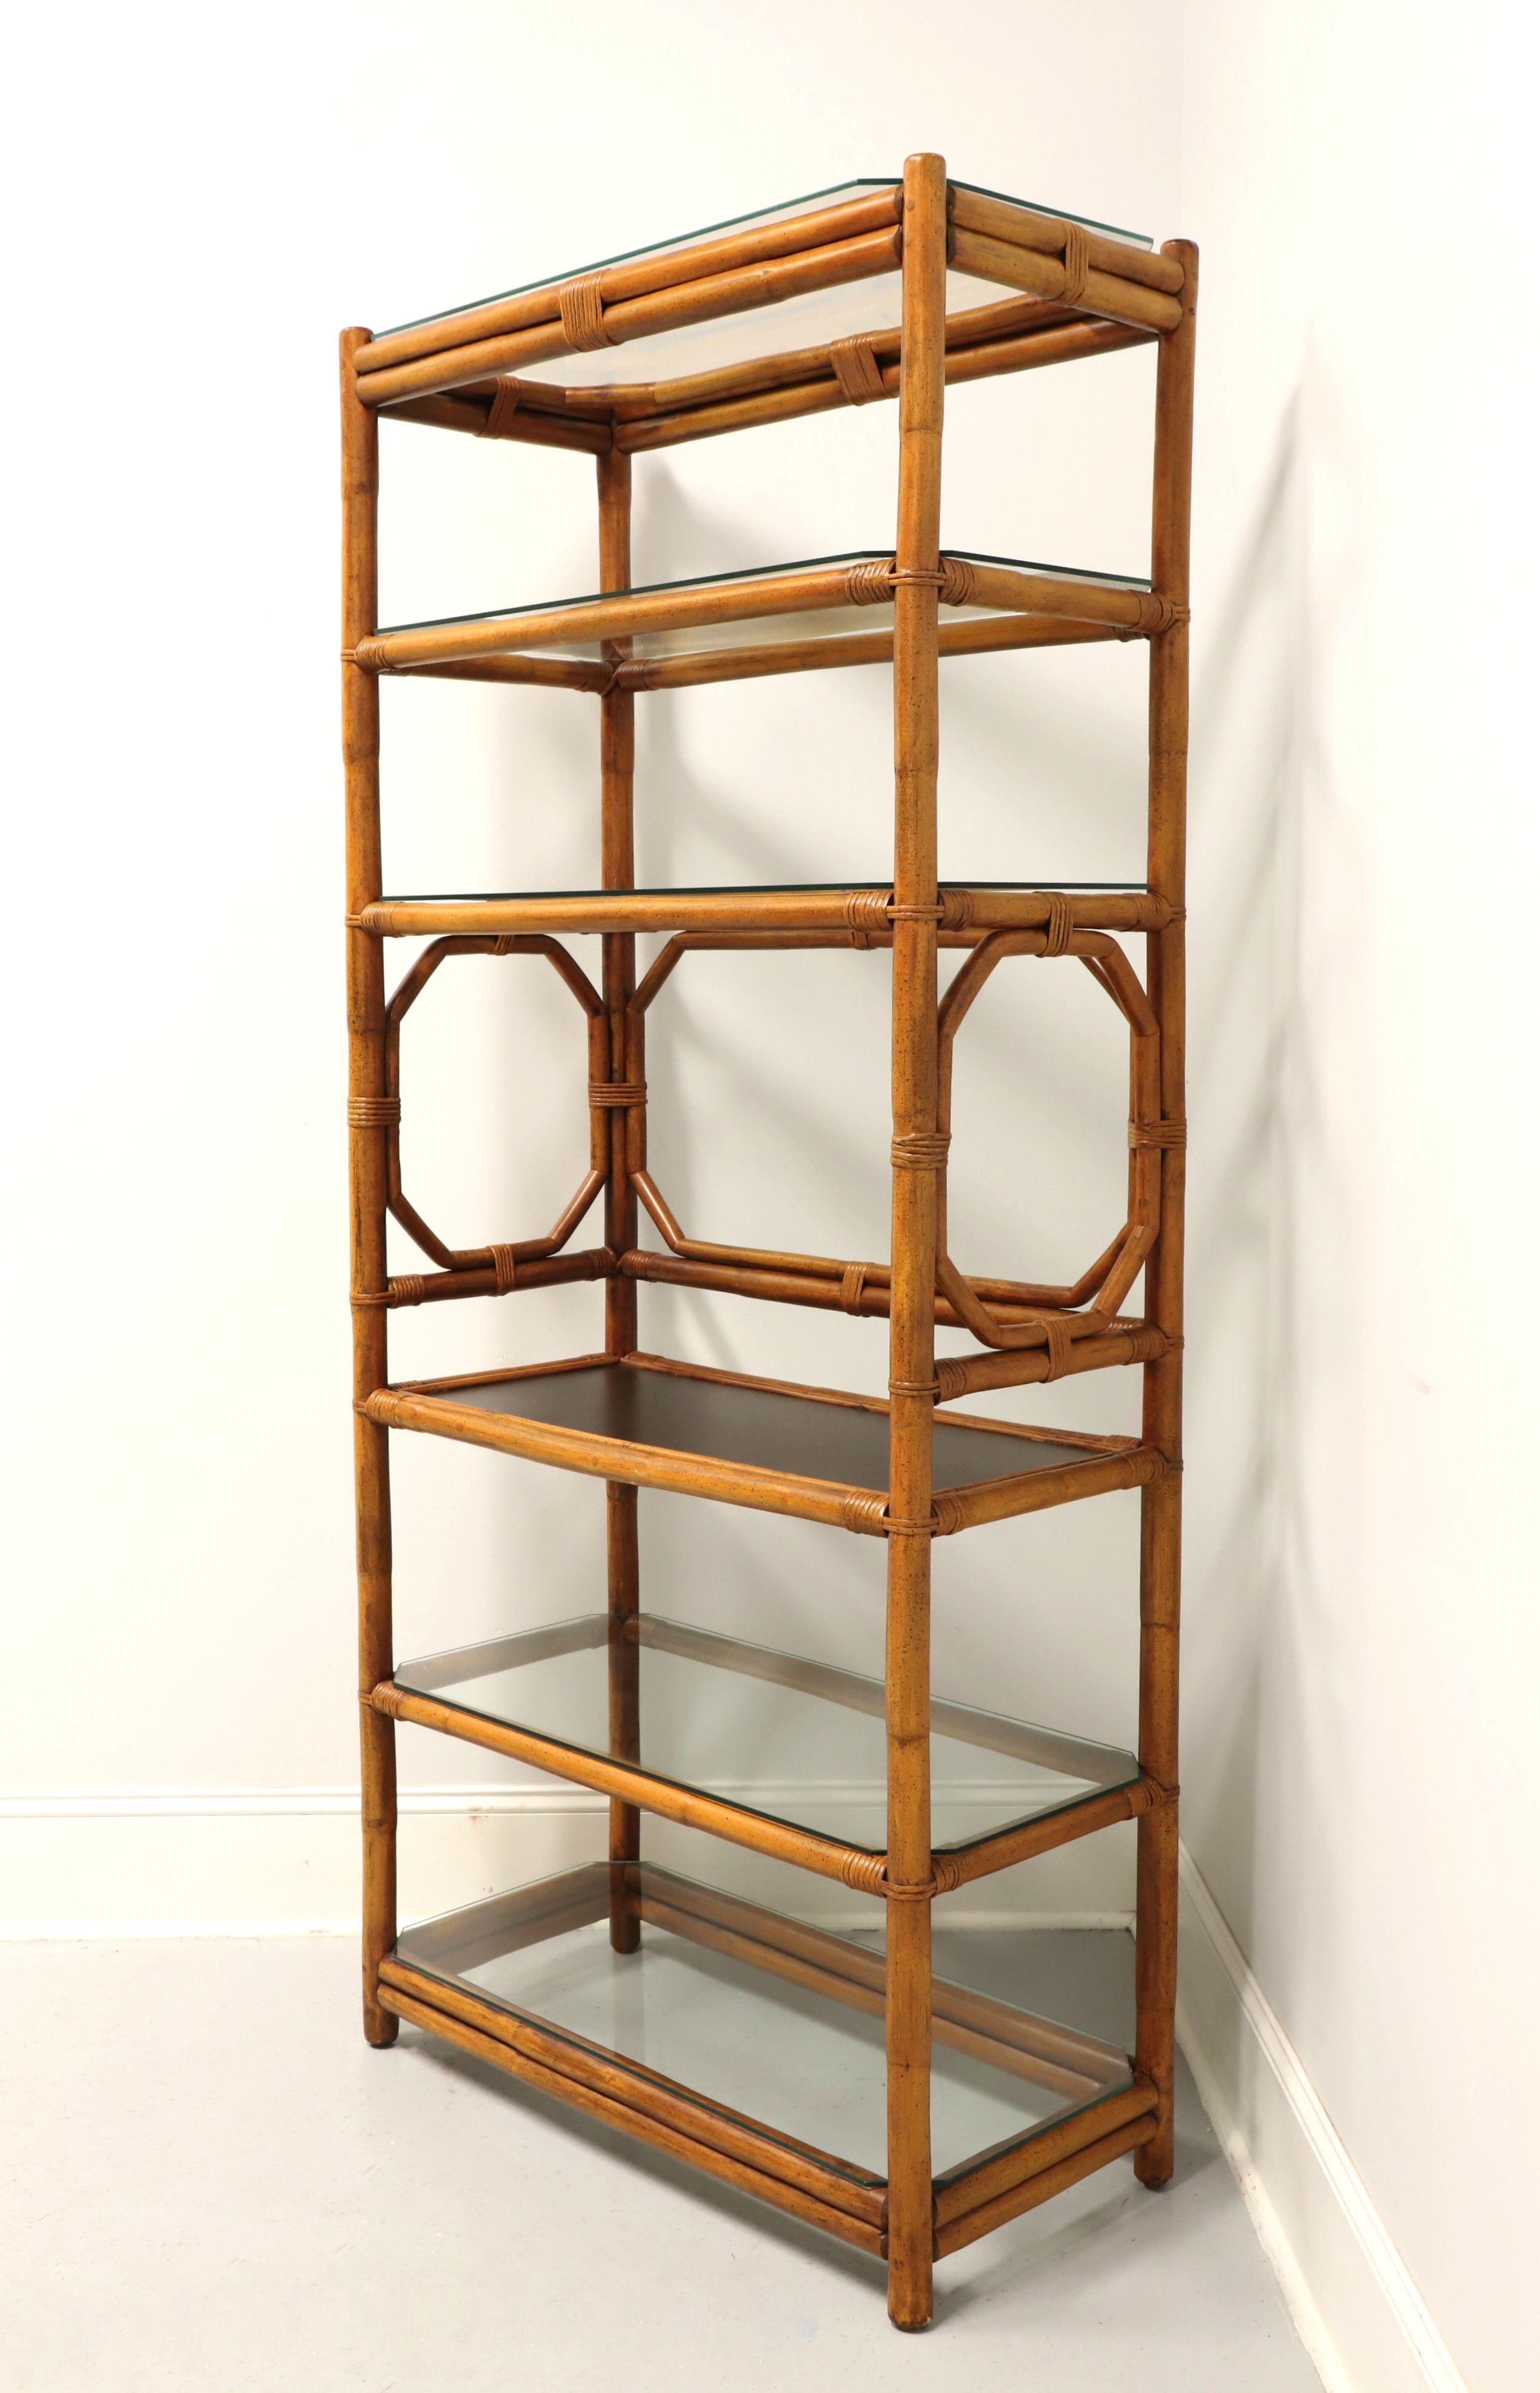 Other FICKS REED Mid 20th Century Faux Bamboo Rattan Etagere Display Shelving Unit